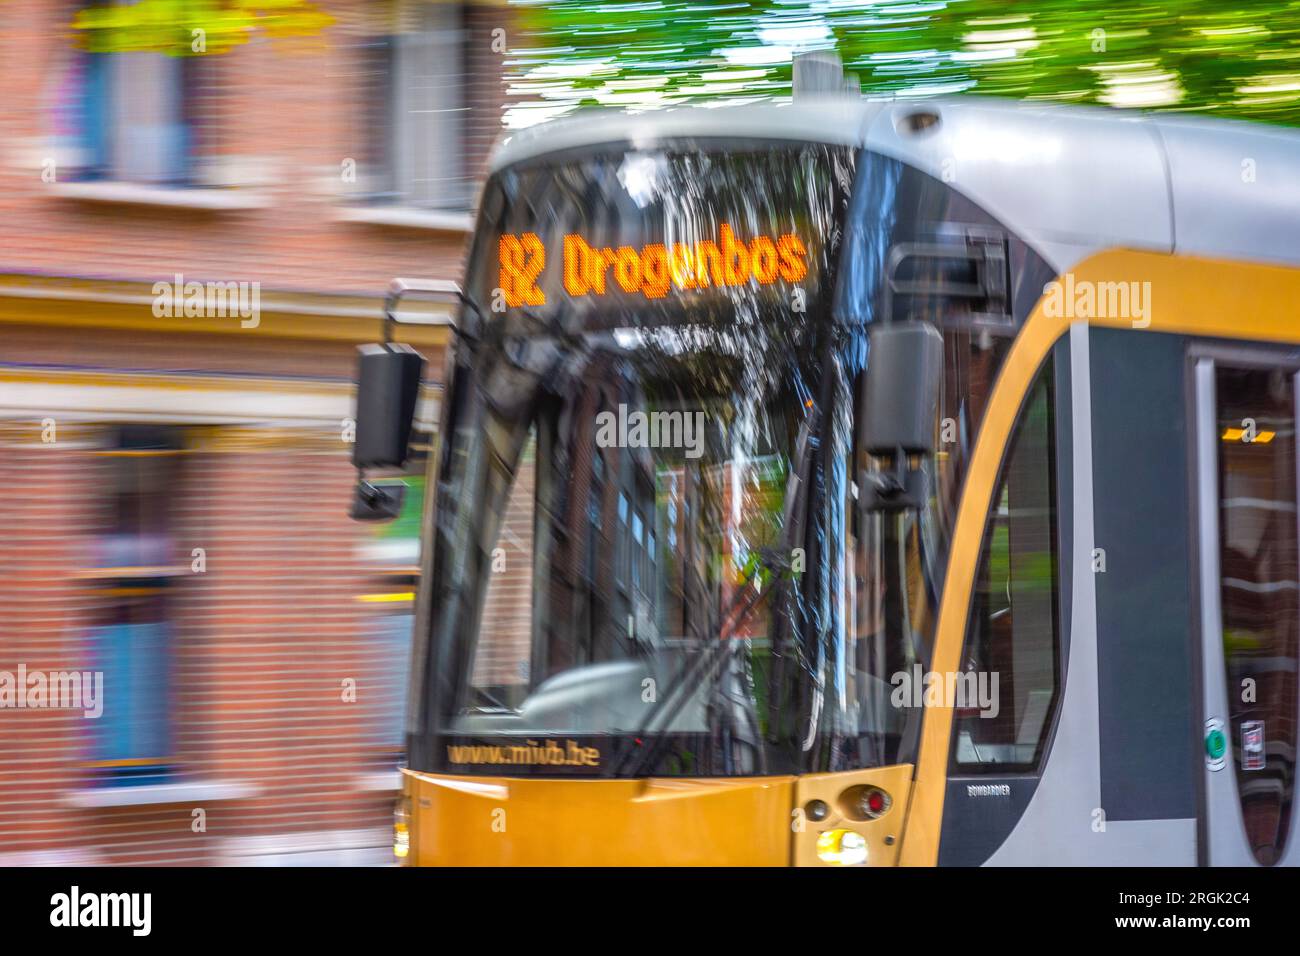 Bombardier tram at speed in central Brussels, Belgium. Stock Photo